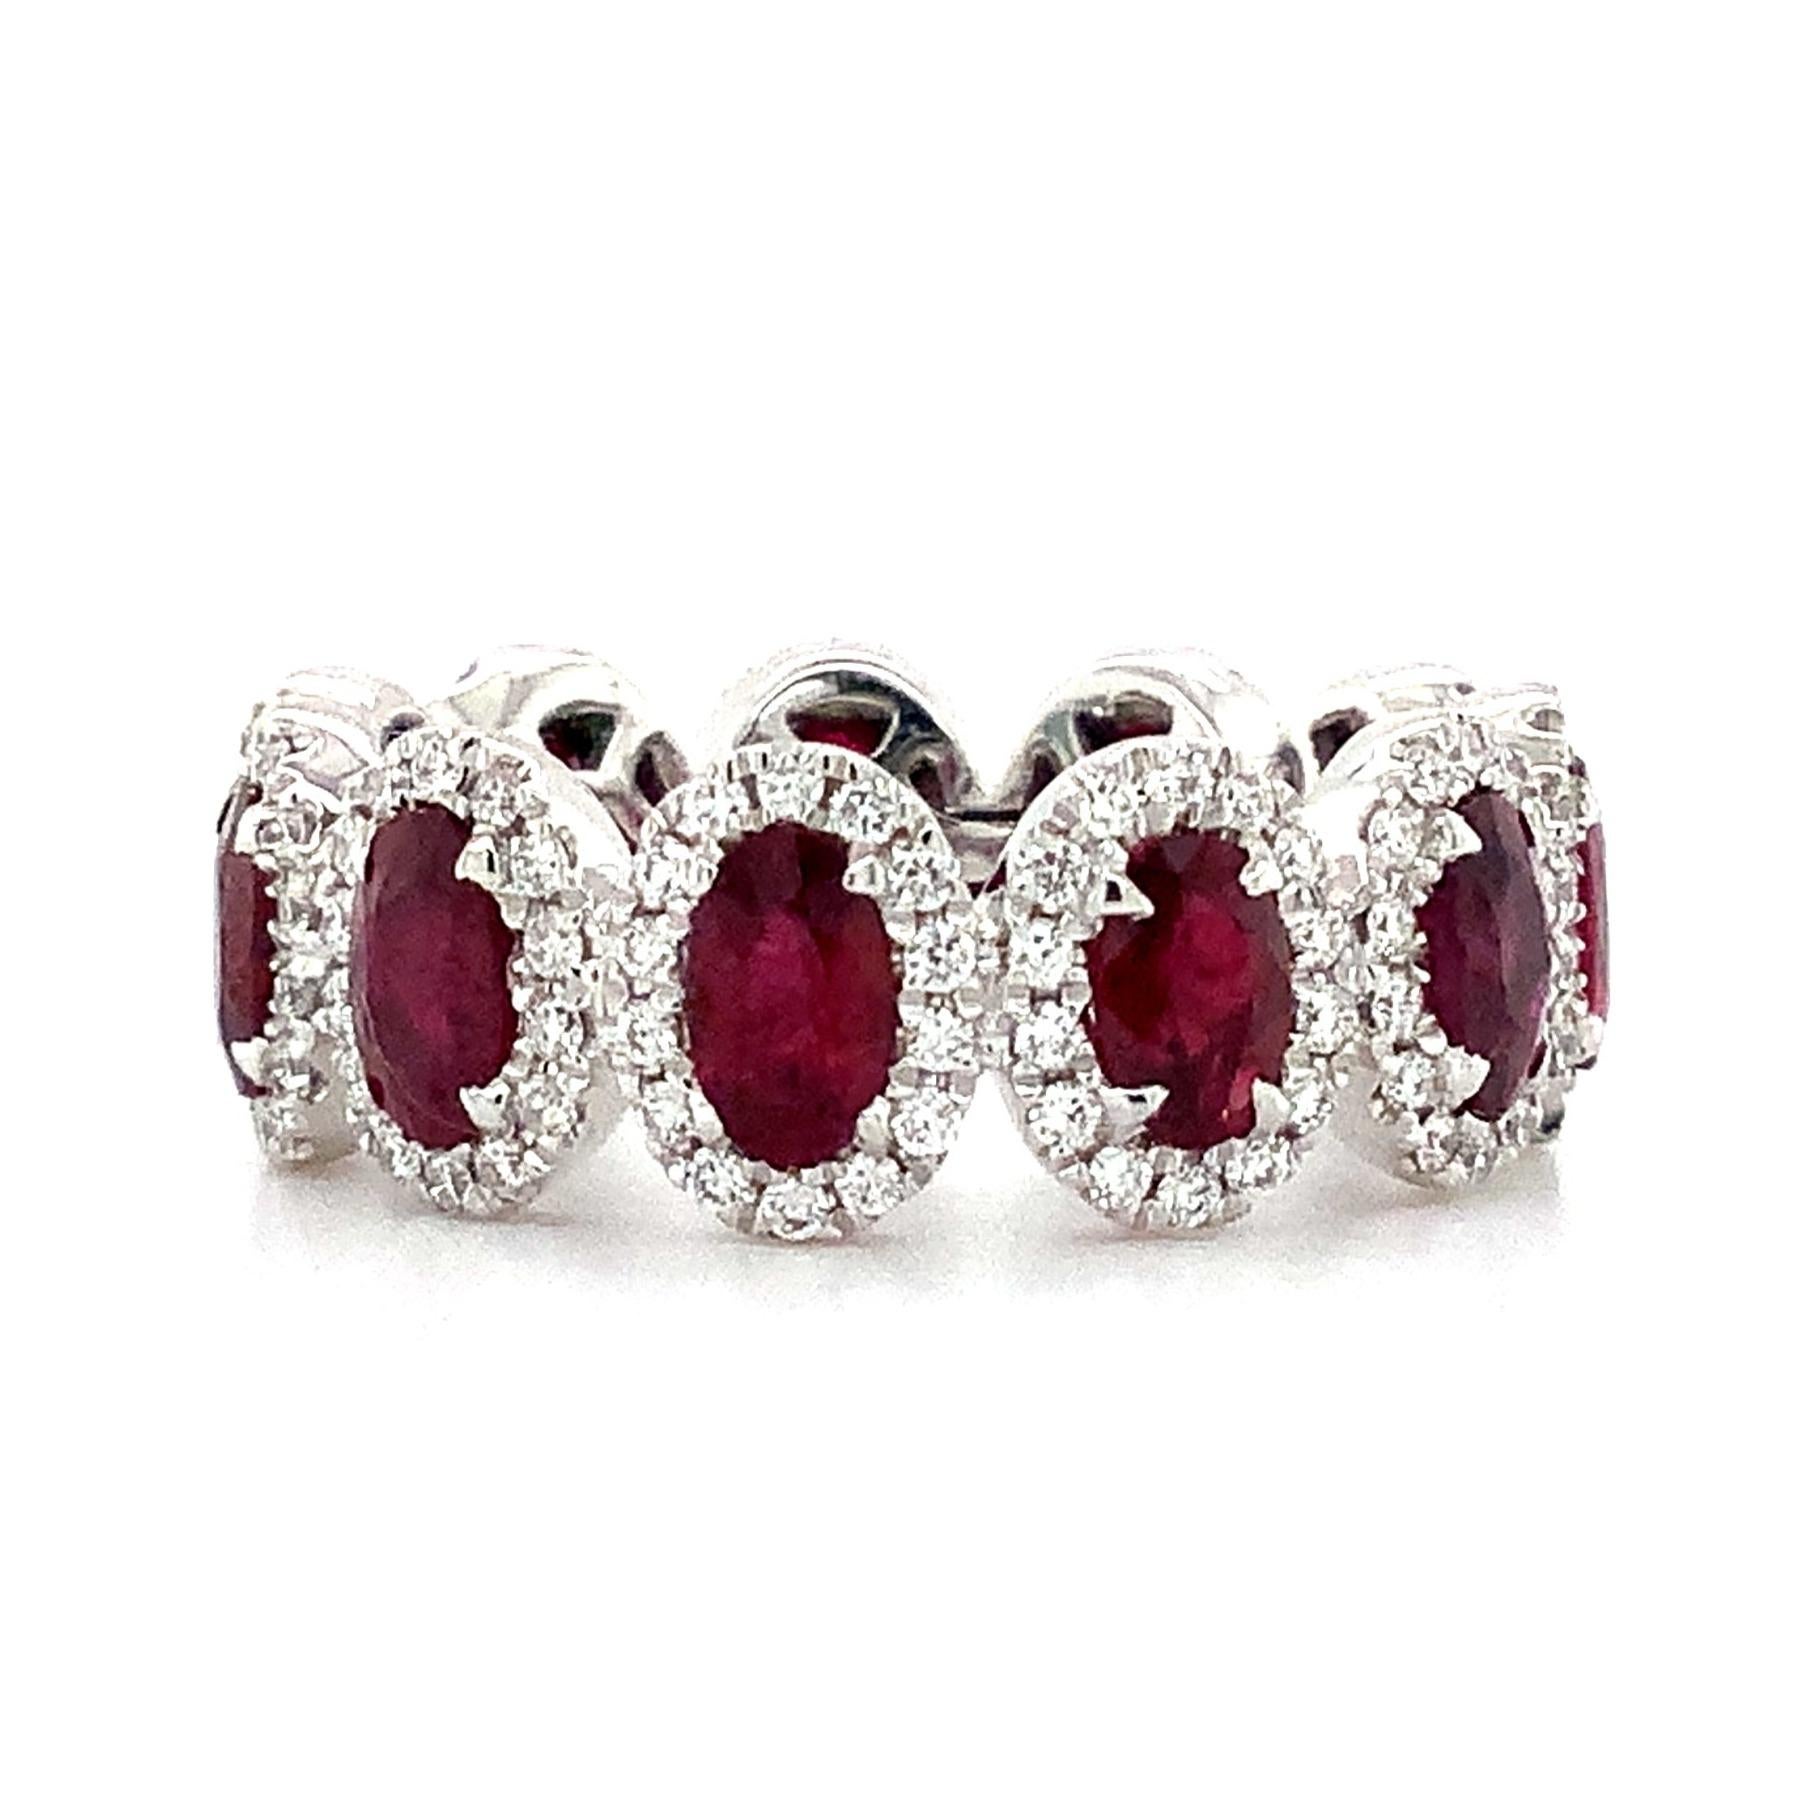 This magnificent Roman + Jules Gem Quality Oval Ruby and Diamond Eternity Ring is carefully constructed using Platinum. These impressive Rubies showcase a deep, rich shade, further emphasized by the halo of 4.04 ct. tw of Diamonds. With 11 Oval